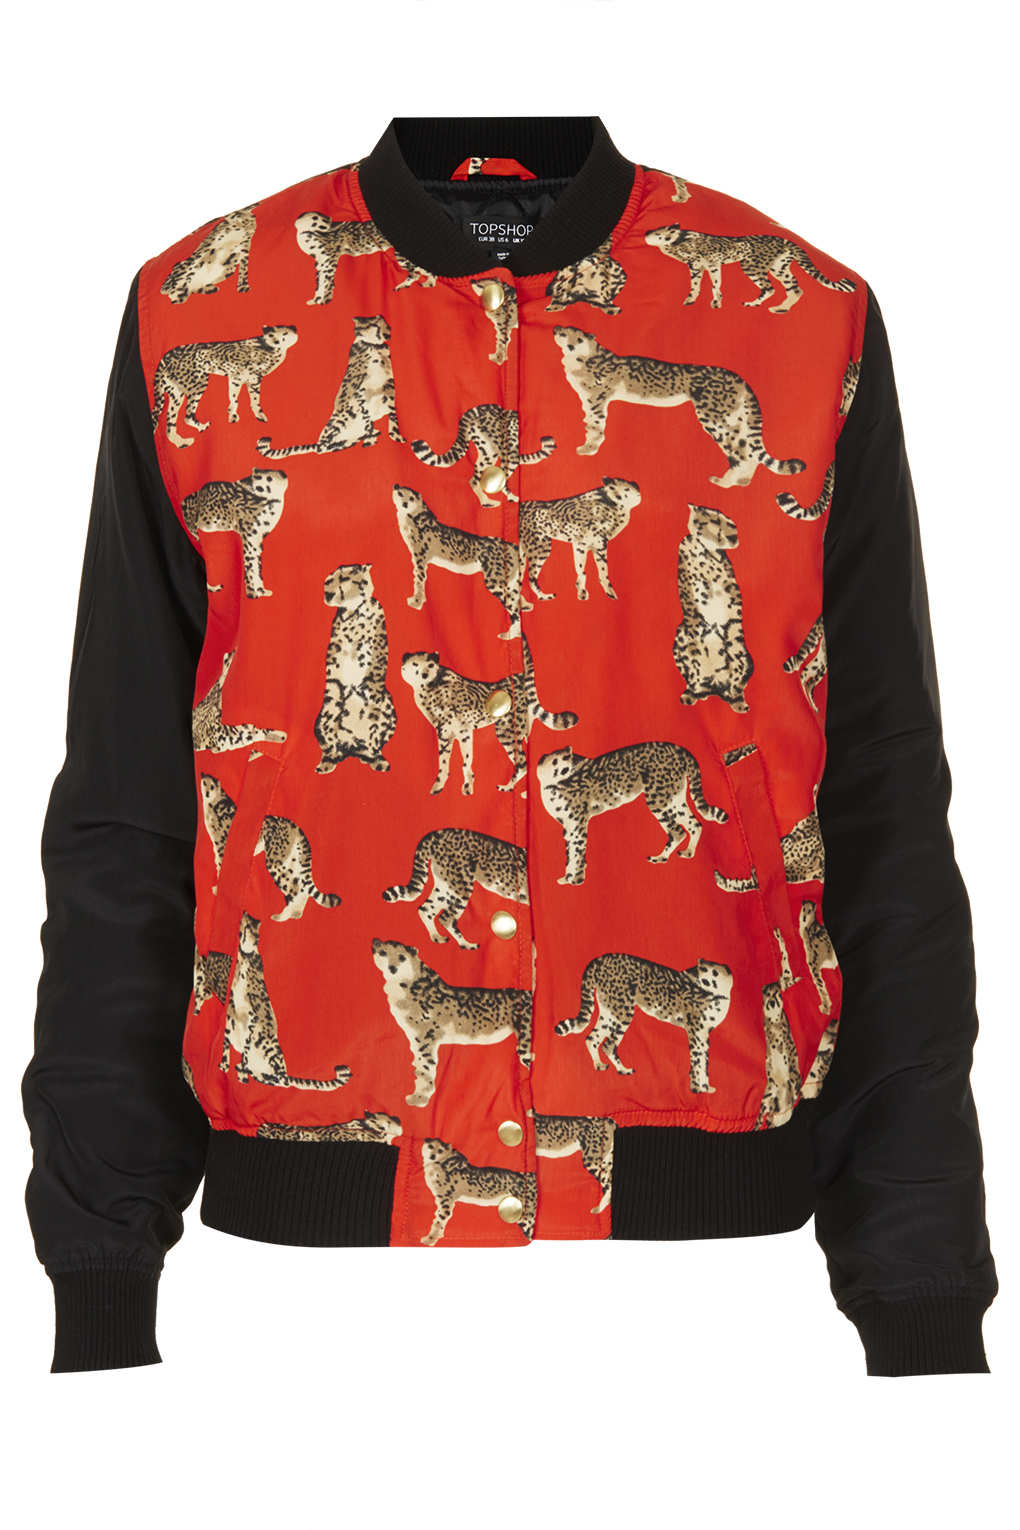 Topshop Cat Print Bomber Jacket in Red | Lyst